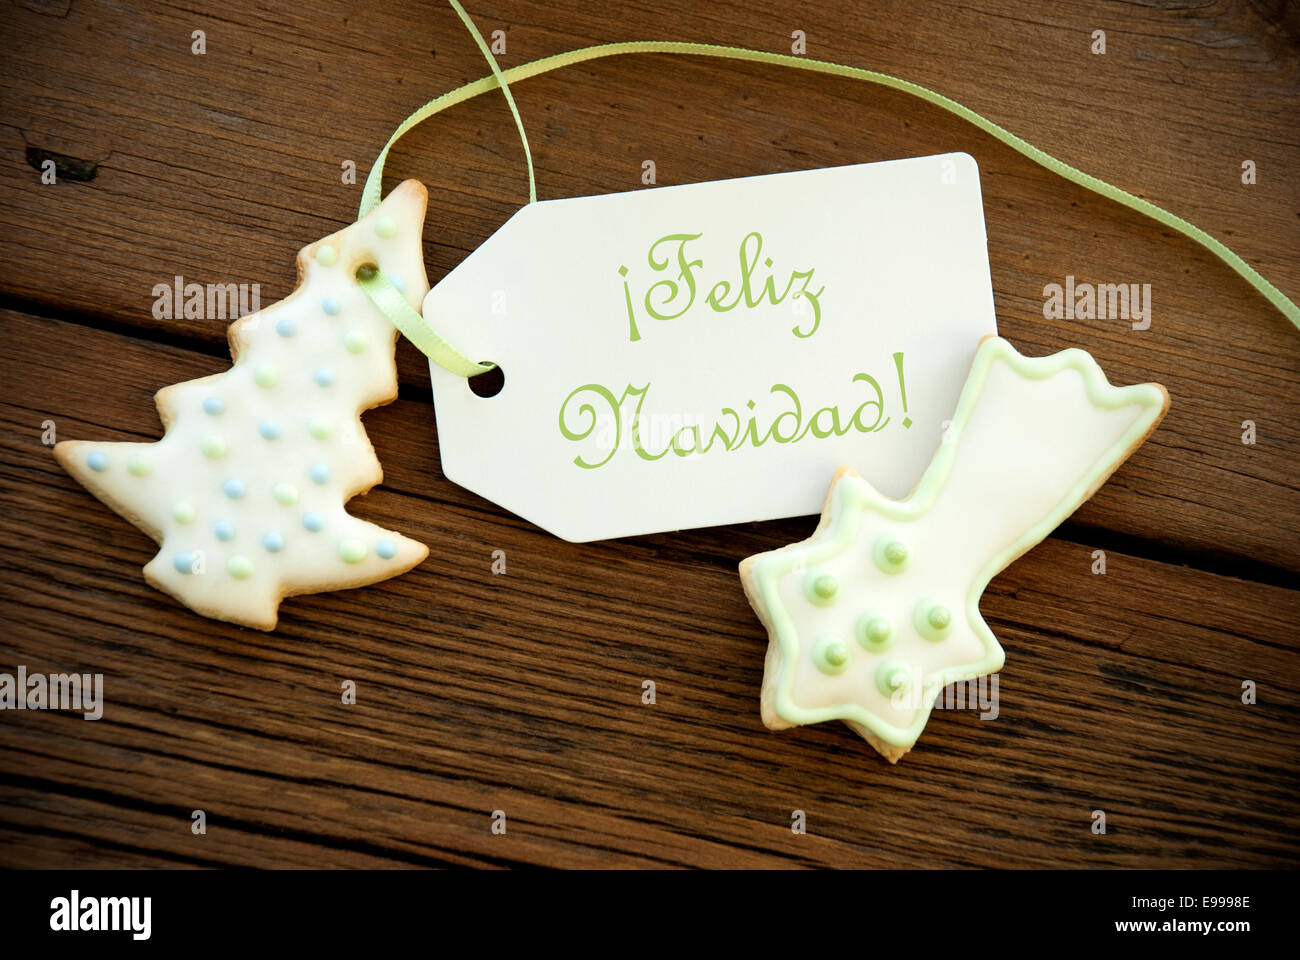 The Spanish Words Feliz Navidad, which means Merry Christmas, on a Label with Christmas Cookies Stock Photo